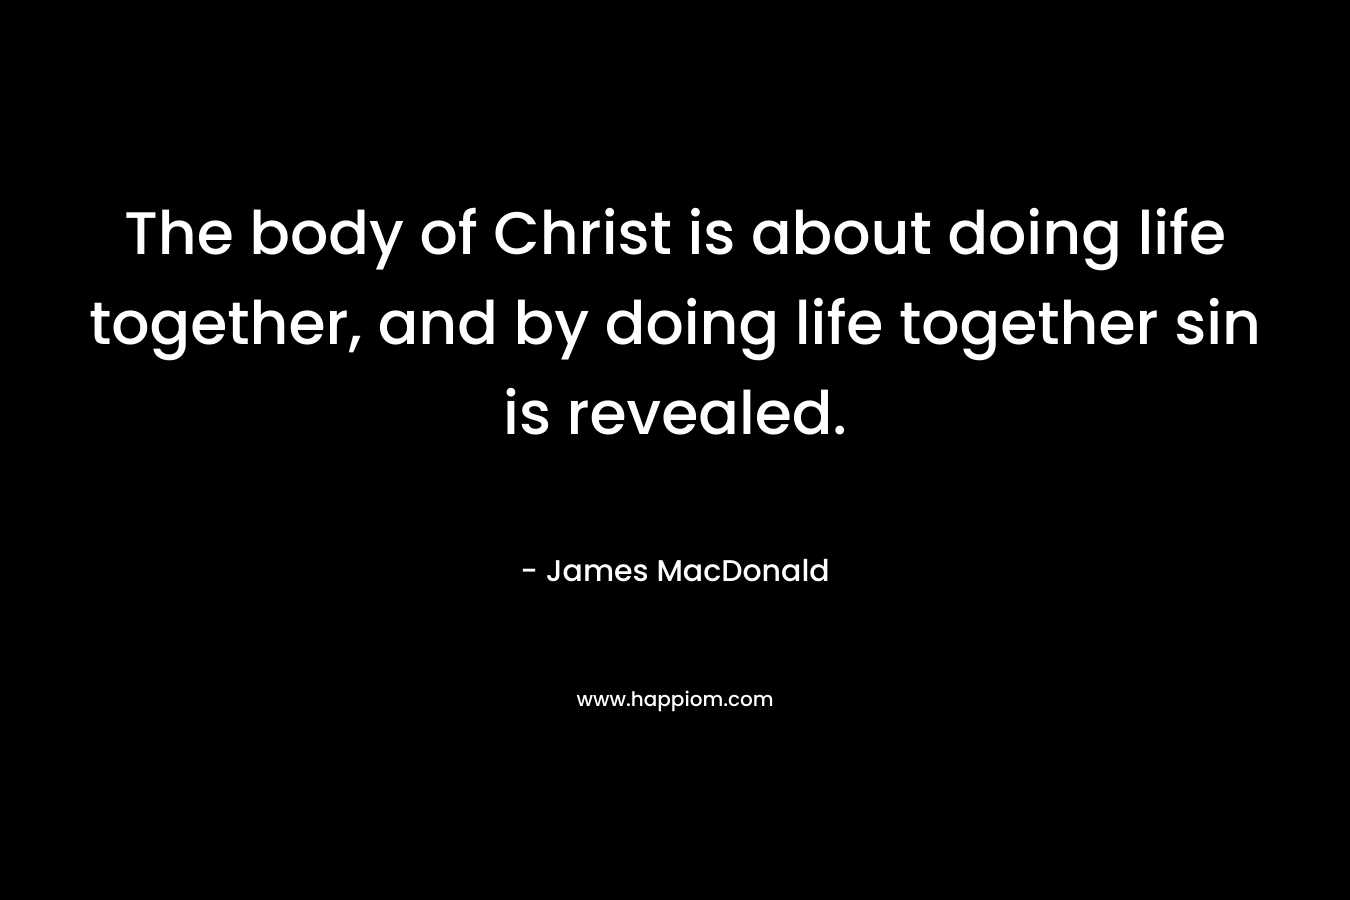 The body of Christ is about doing life together, and by doing life together sin is revealed. – James MacDonald